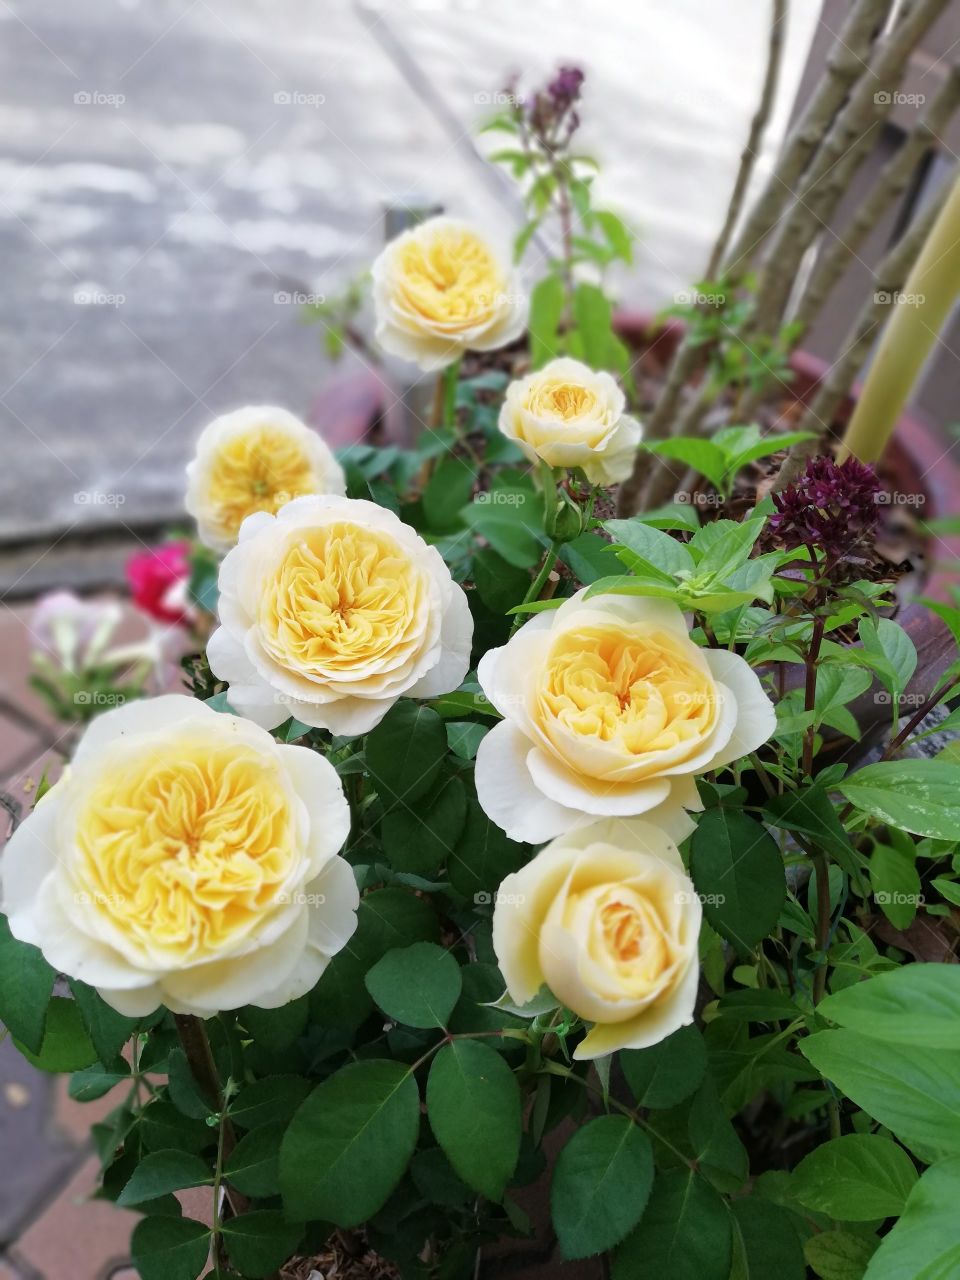 Yellow roses in my garden blossom together  it makes feel good